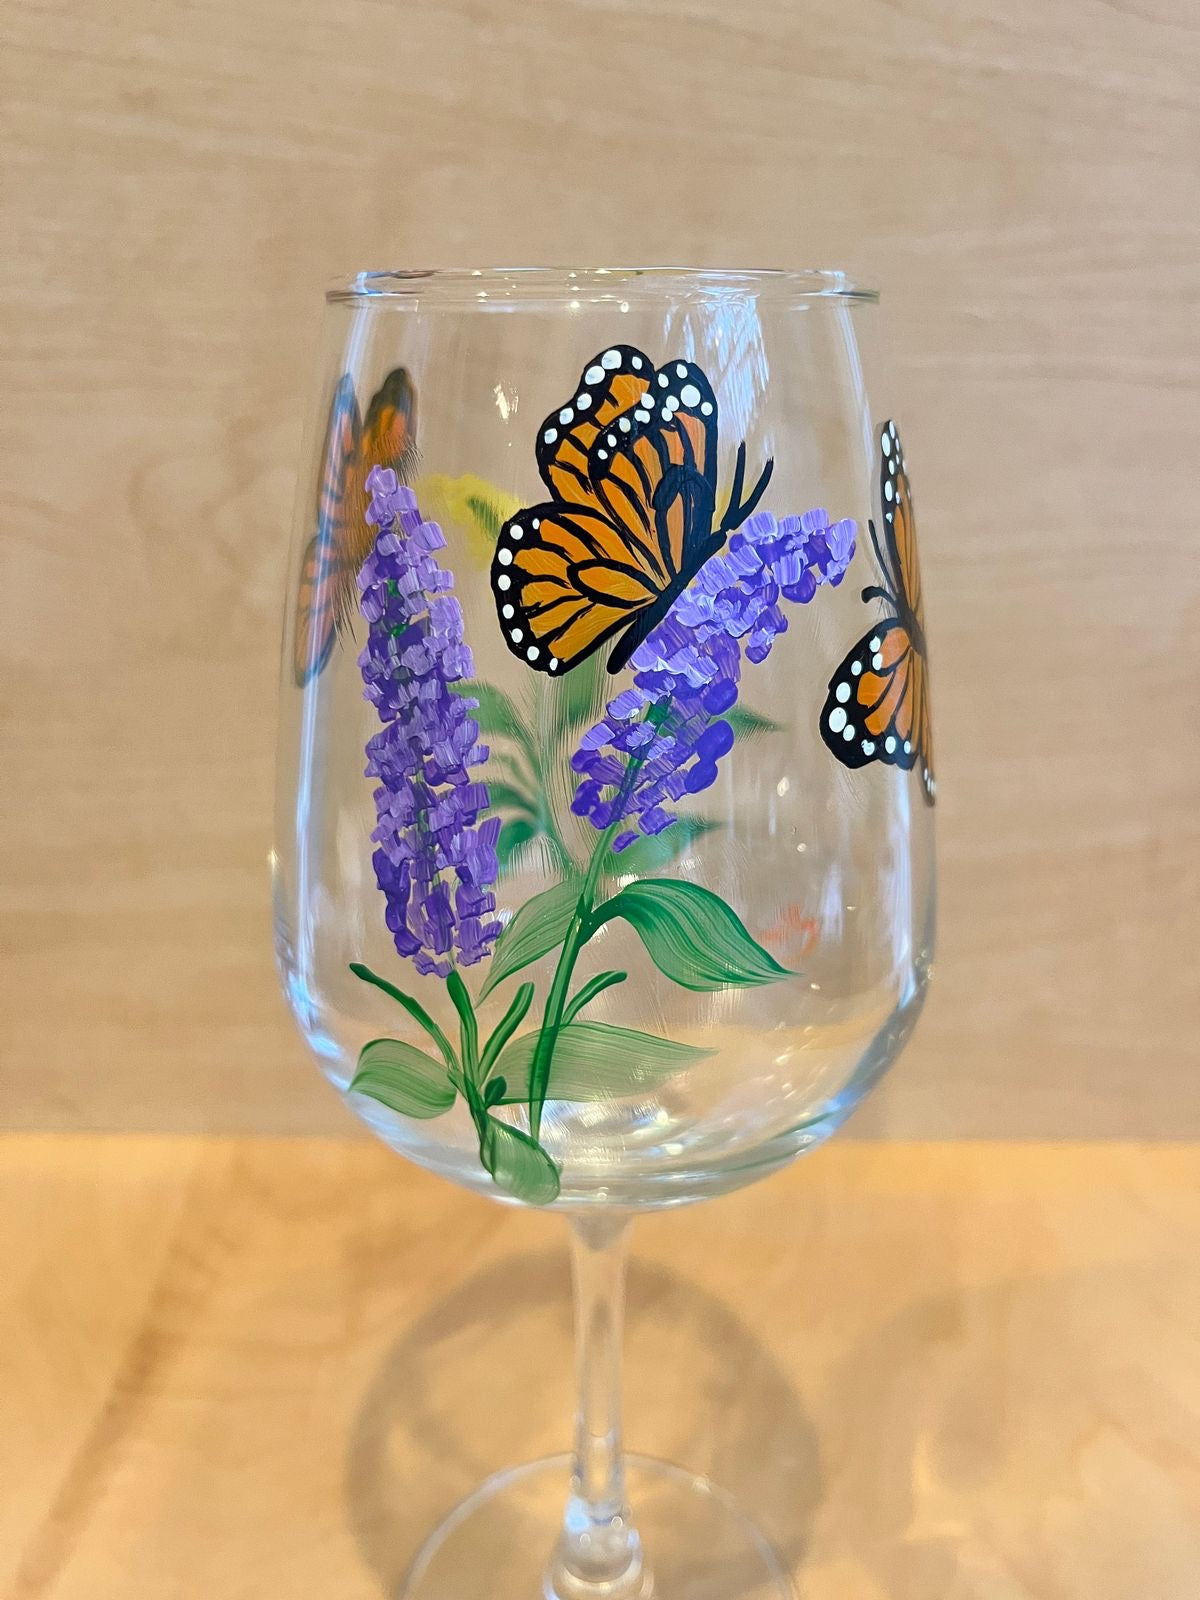 (4/18) PAINT YOUR OWN WINE GLASS WORKSHOP